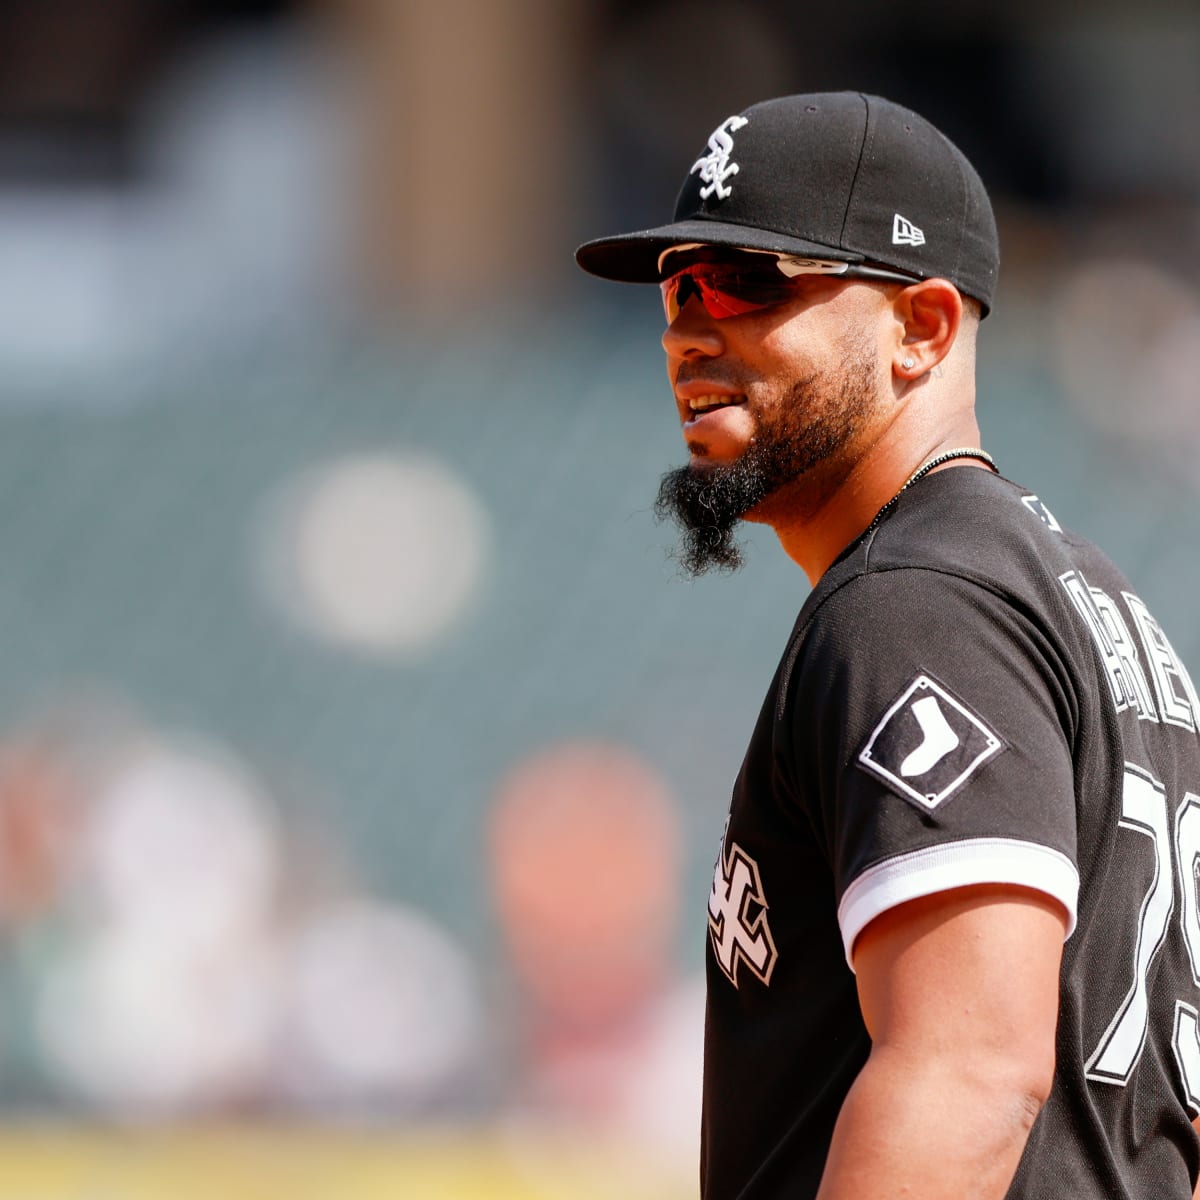 MLB Breaking News: Free Agent First Basemen Jose Abreu Signs With The  Houston Astros